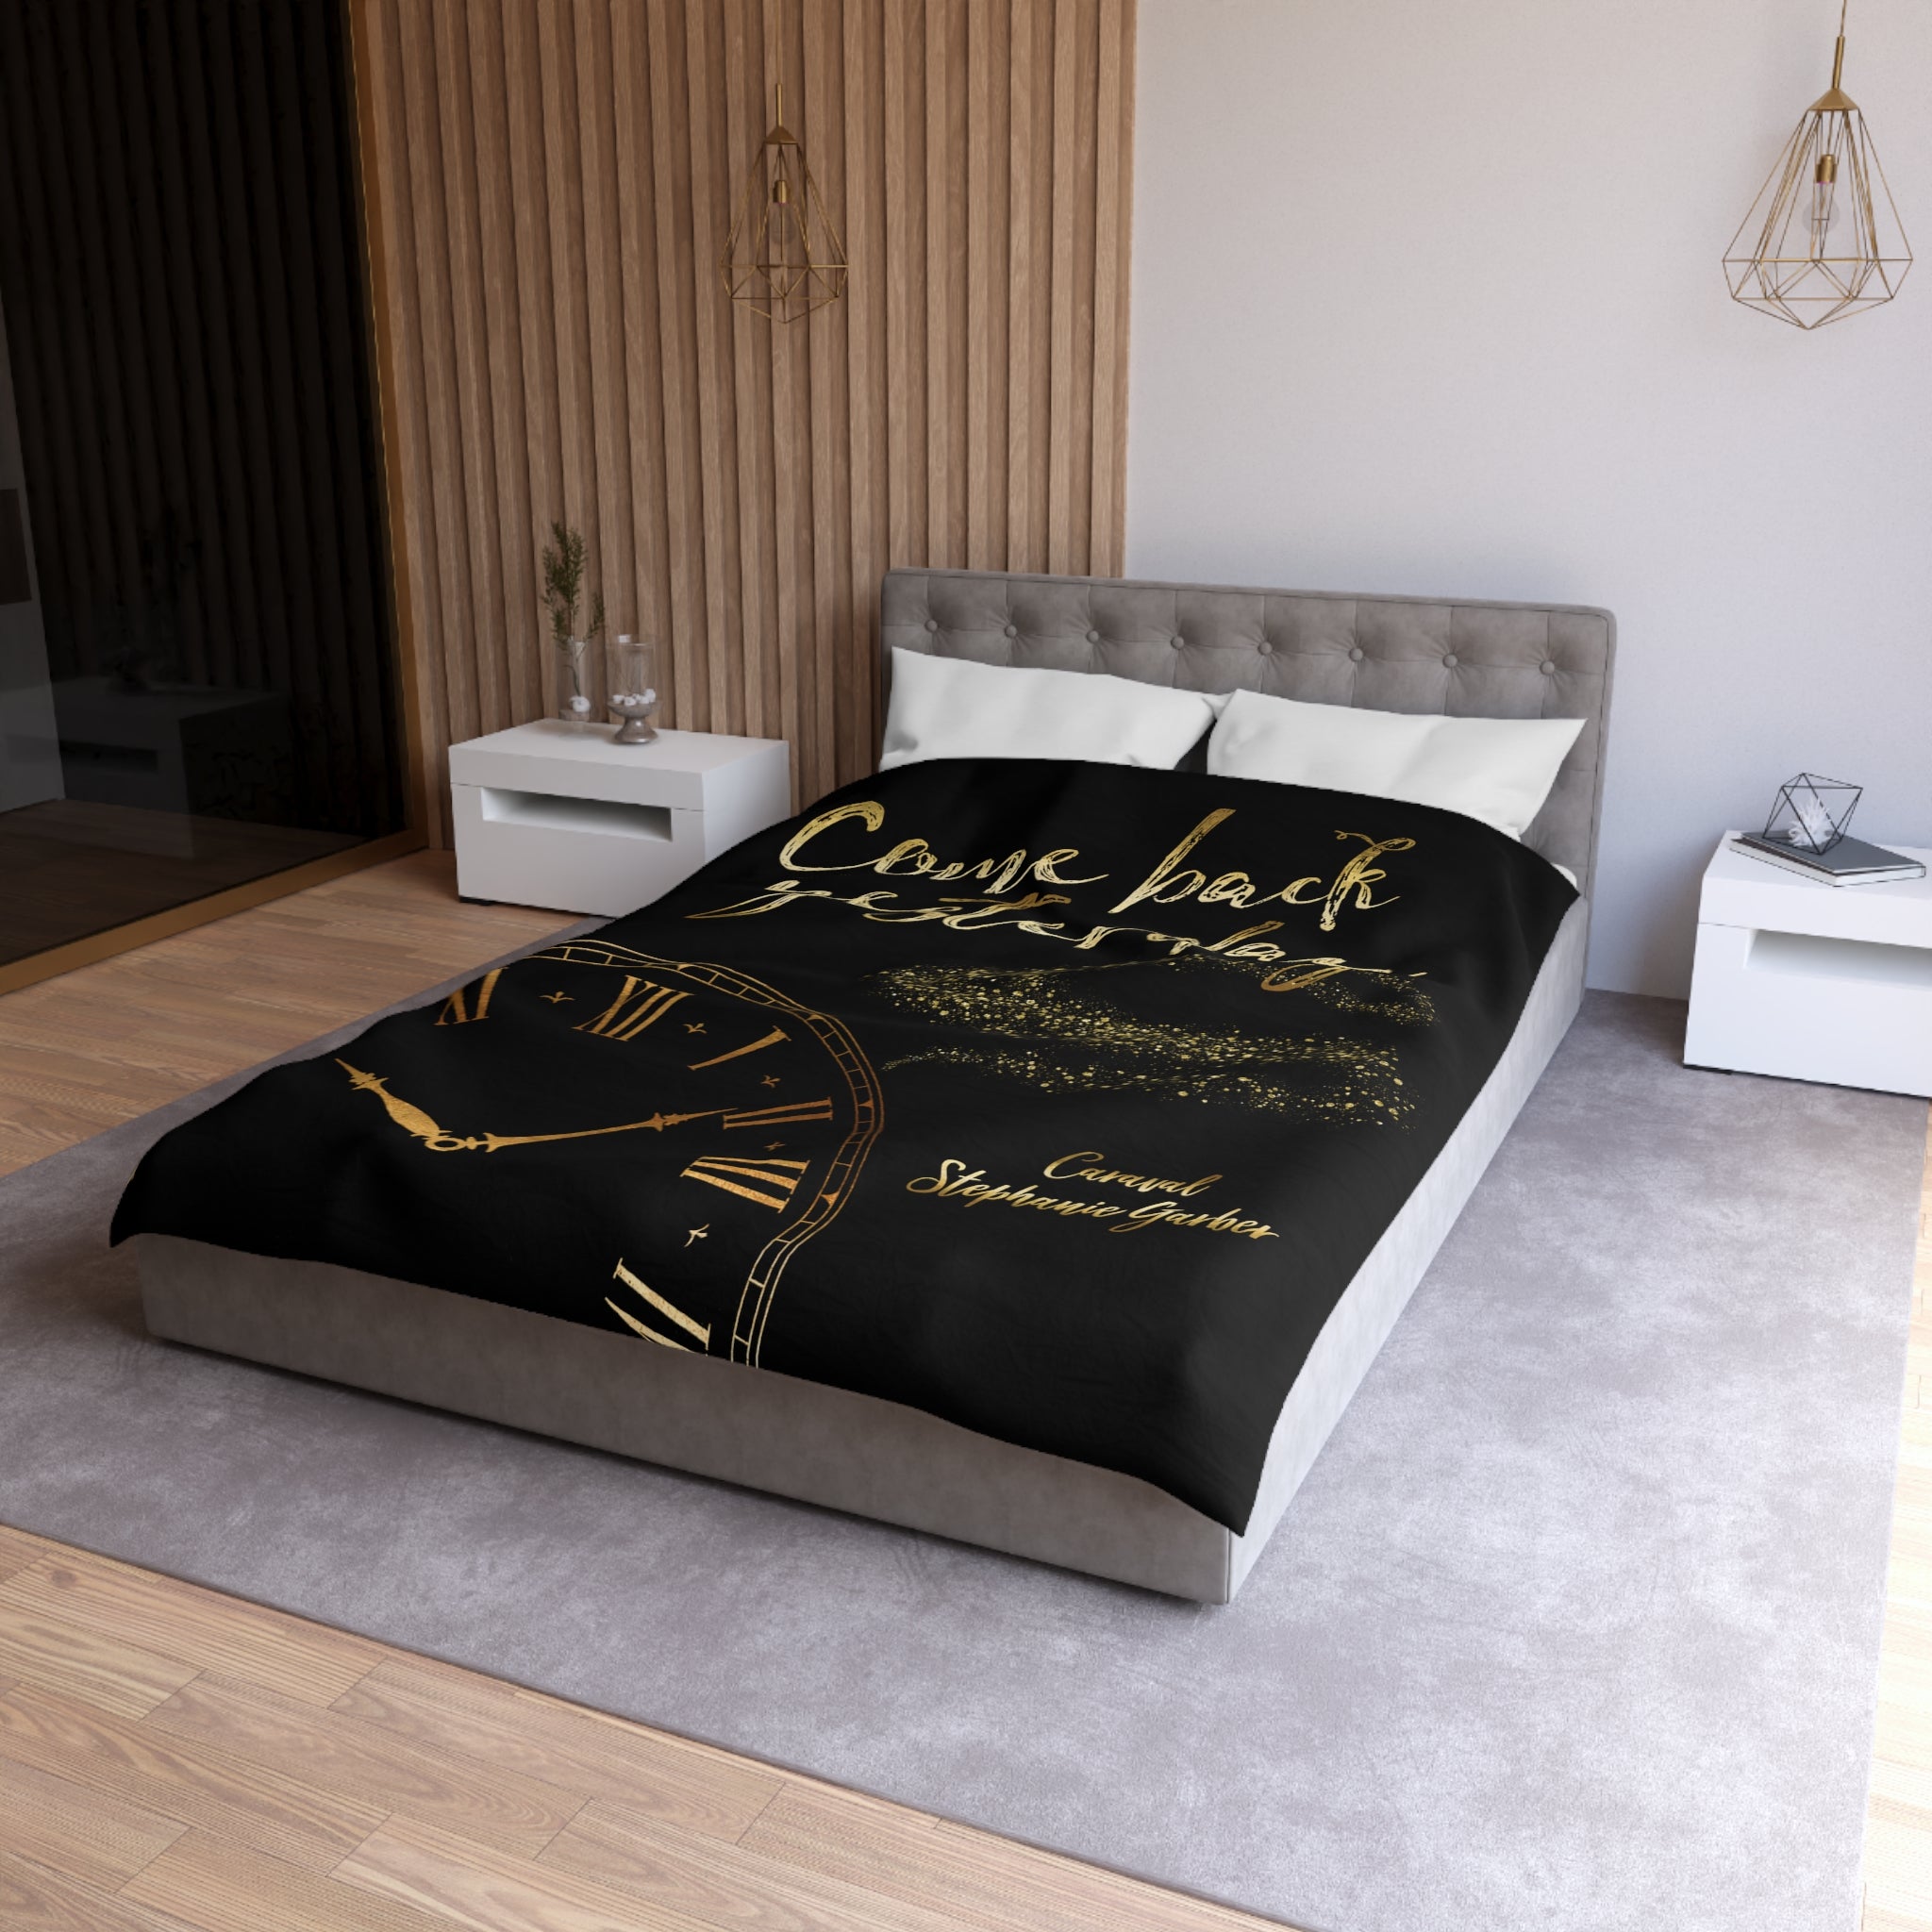 Come back yesterday. Caraval Duvet Cover